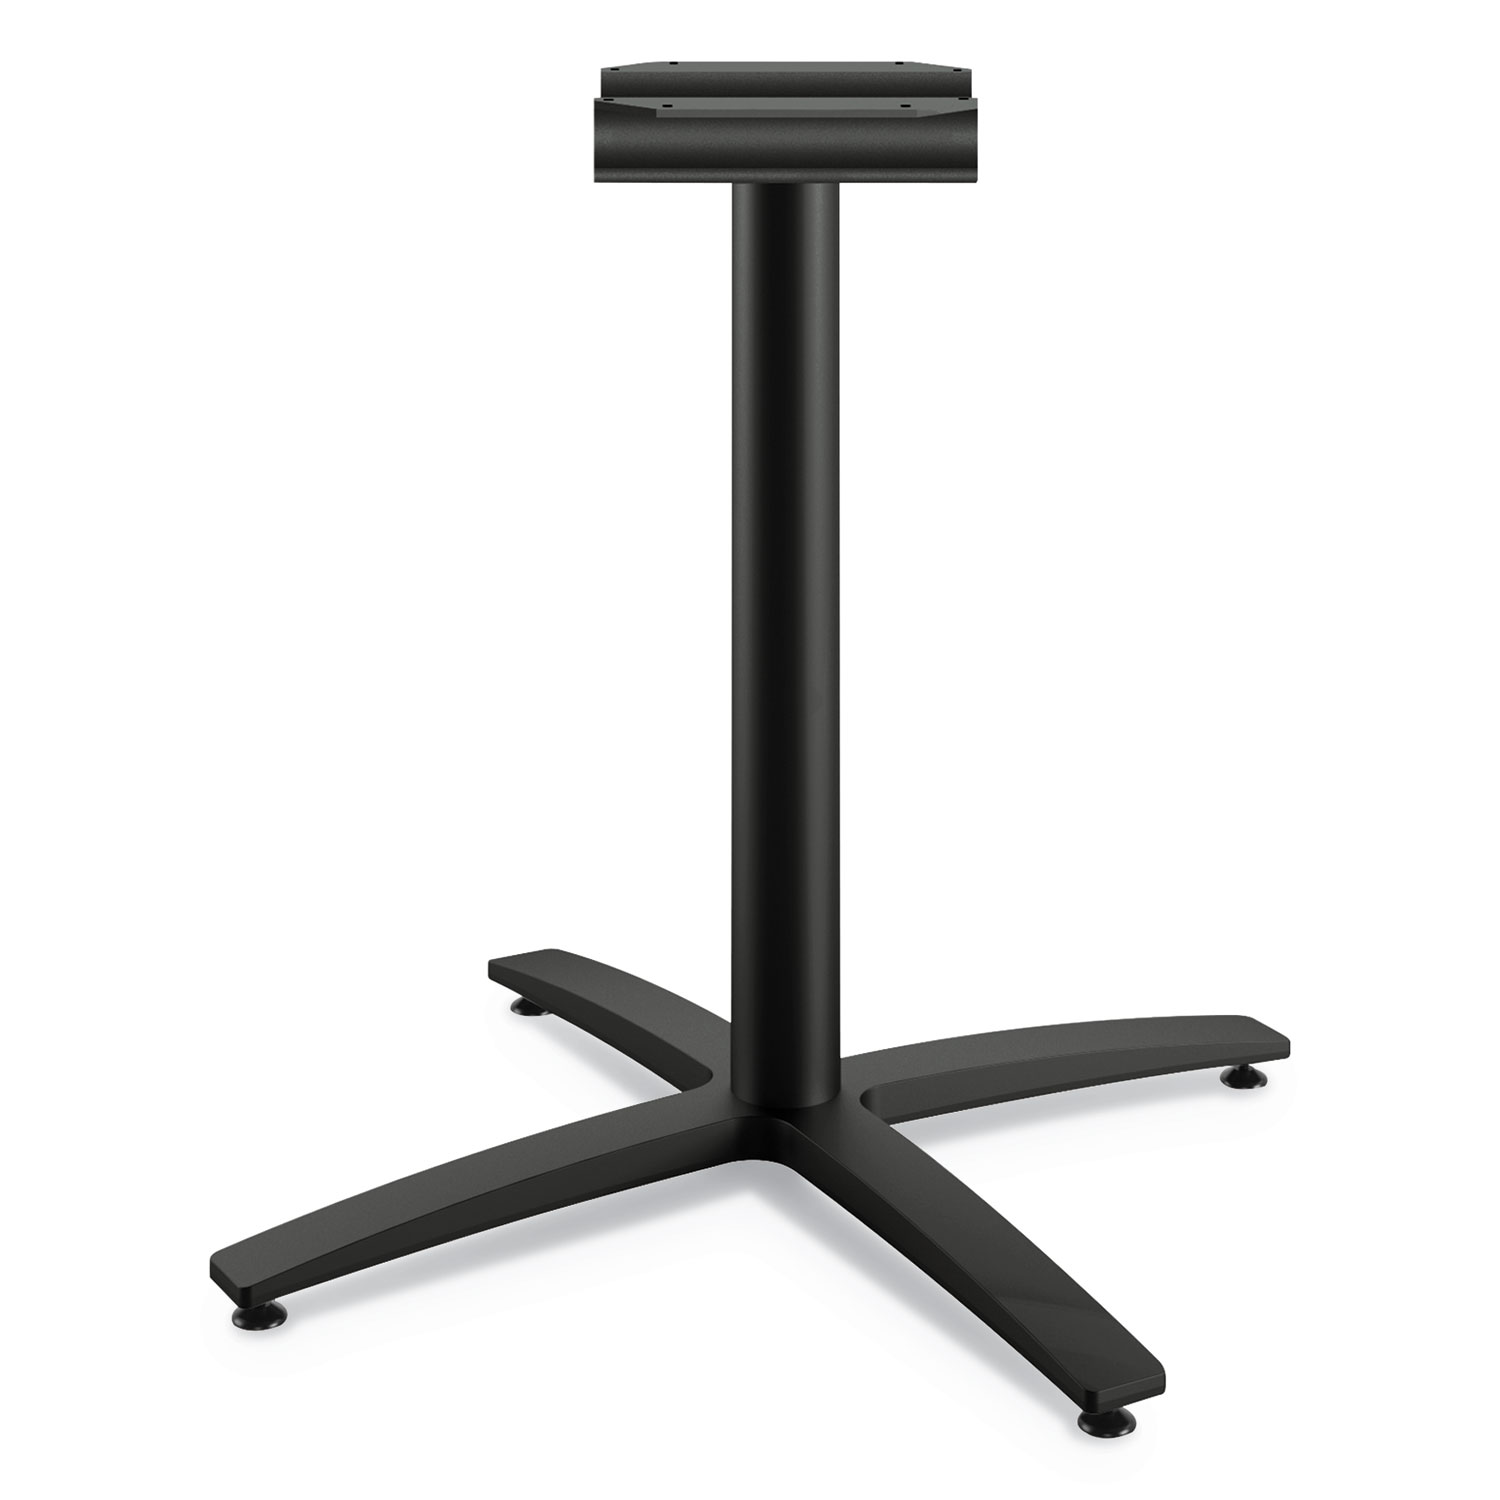  HON HBTTX30L.P6P Between Seated-Height X-Base for 42 Table Tops, Black (HONBTX30LP6P) 